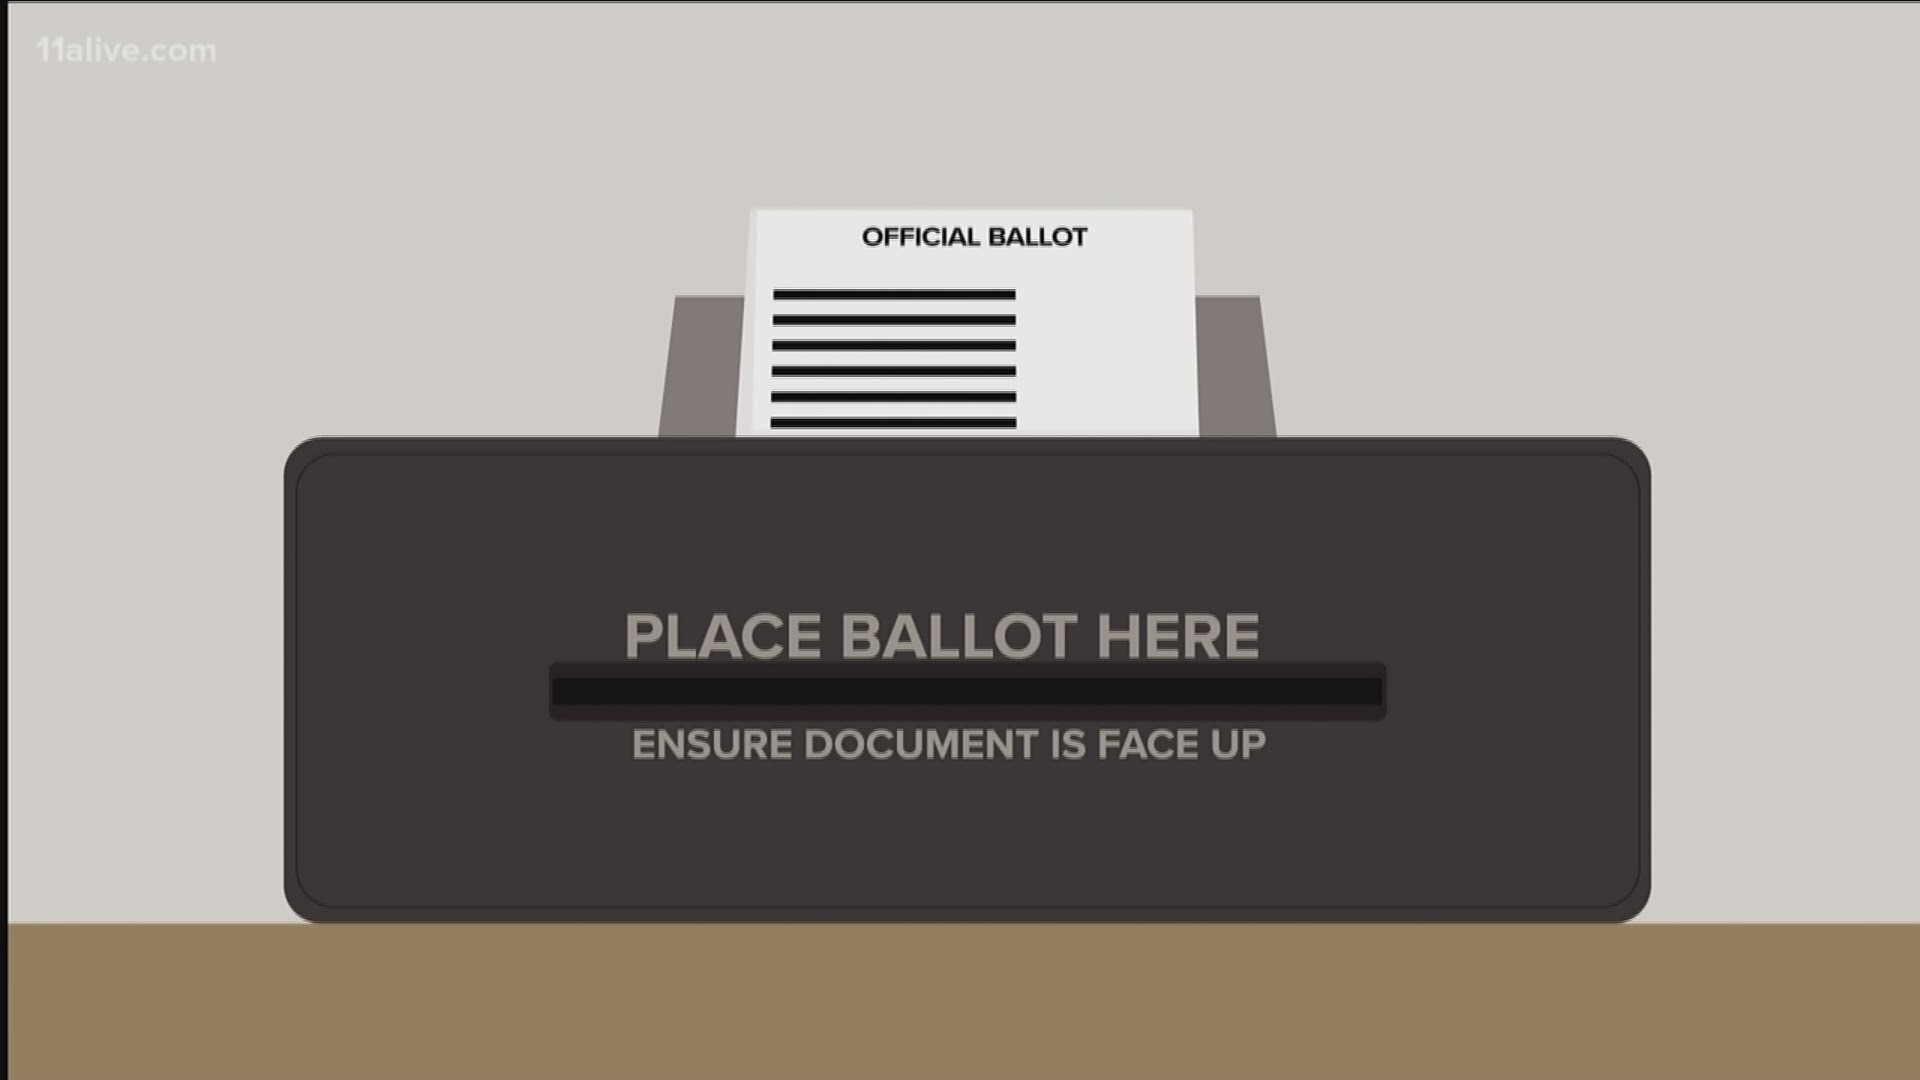 The machine would print a paper ballot, then put the ballot in a scanner to record the vote.